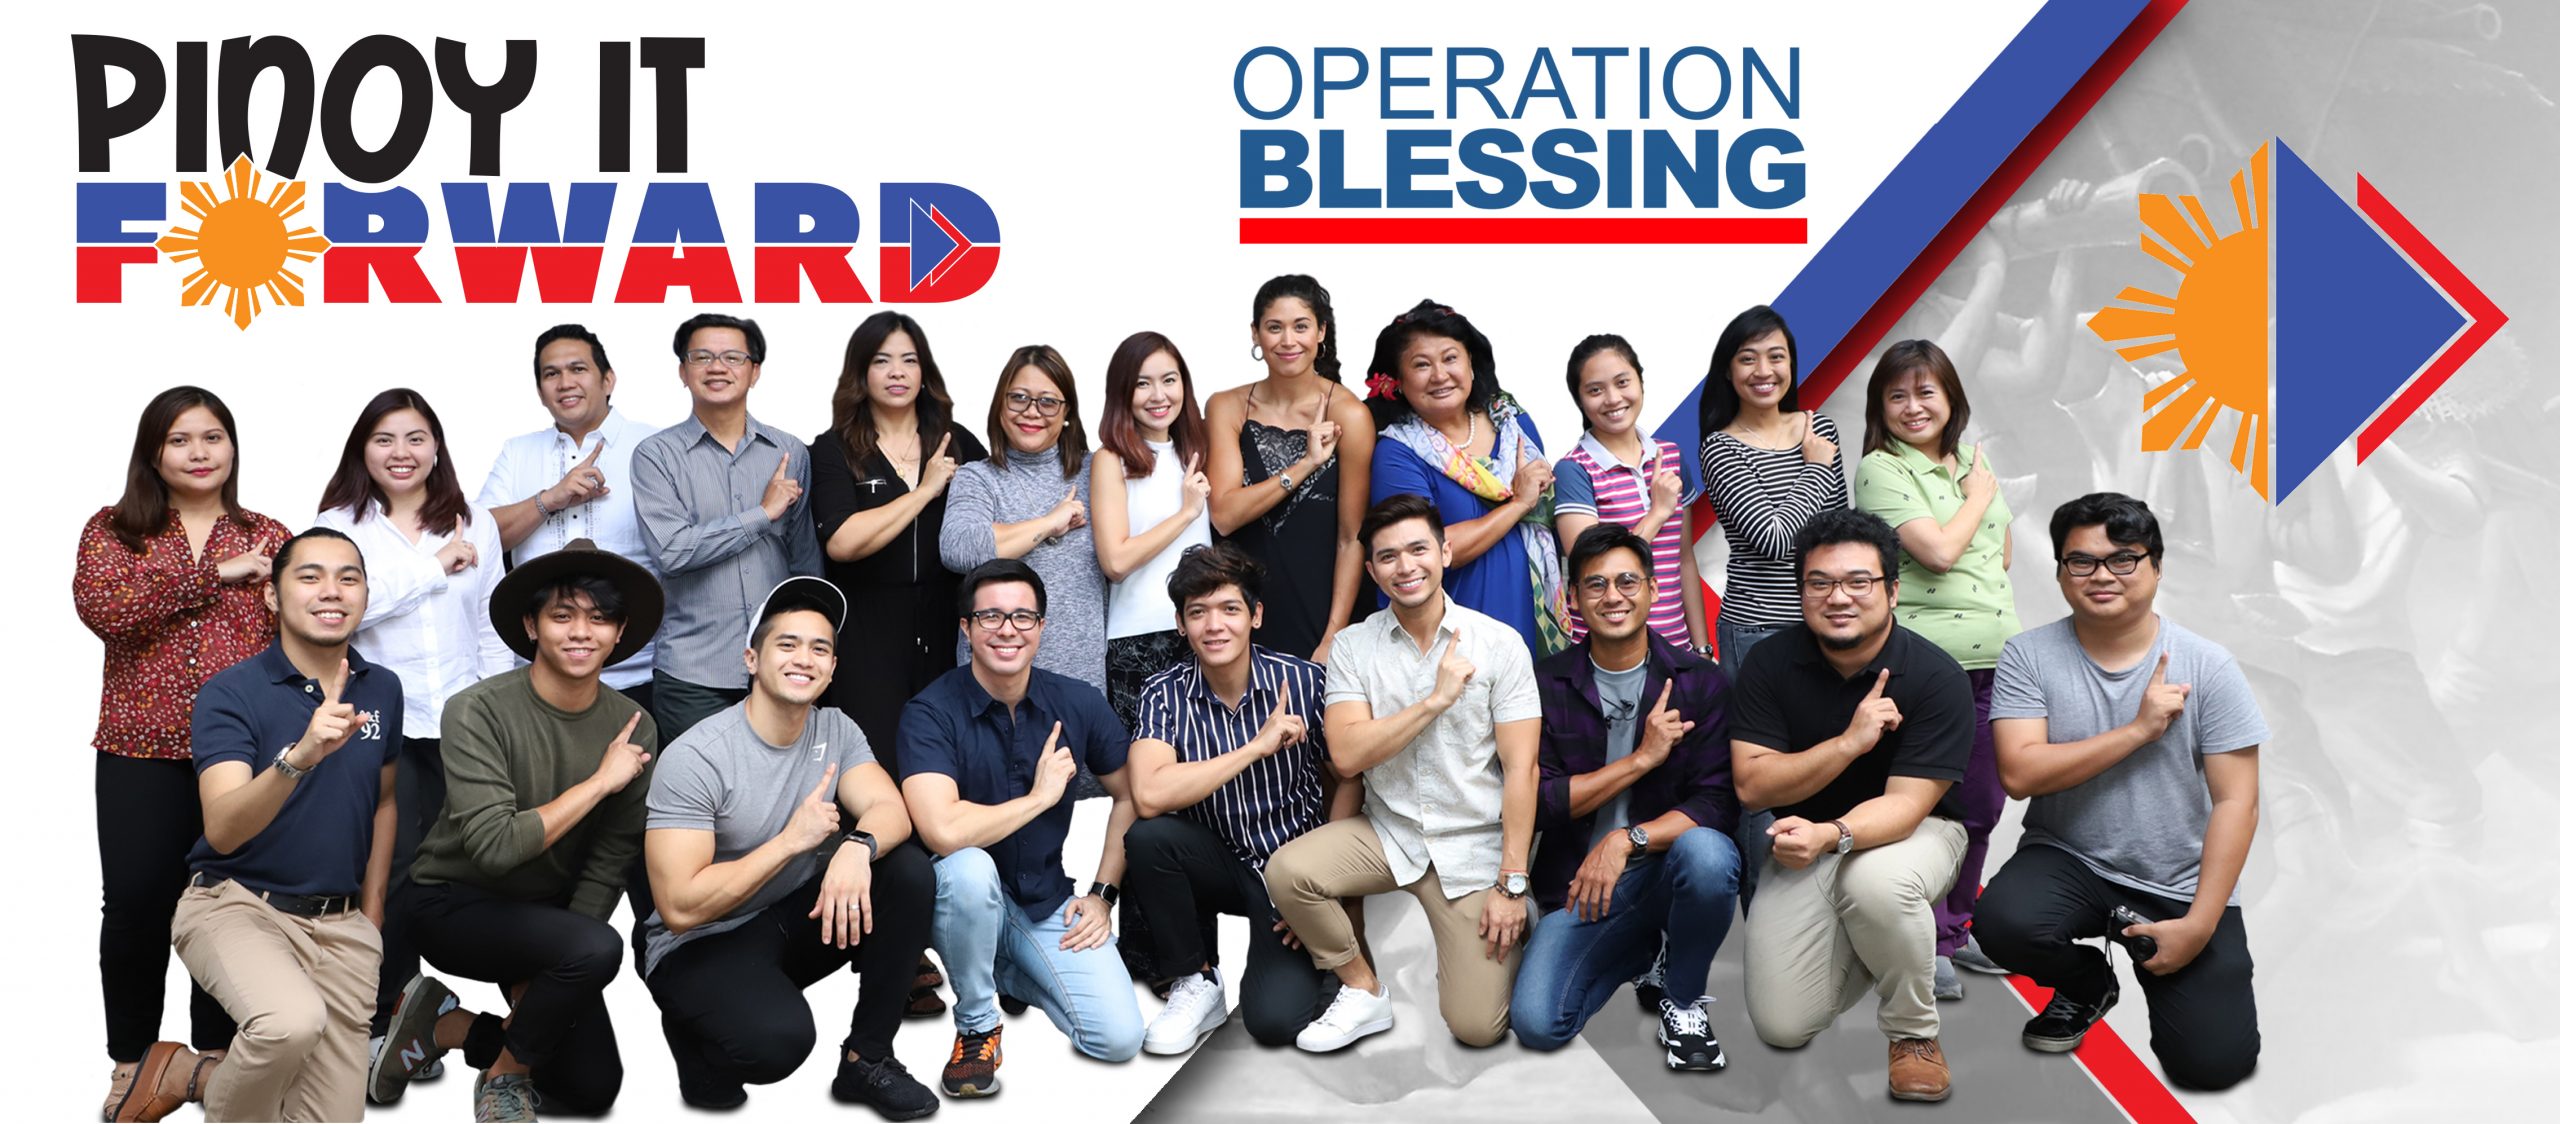 PinoyItForward to help Operation Blessing’s Community of Hope-Busai Valley